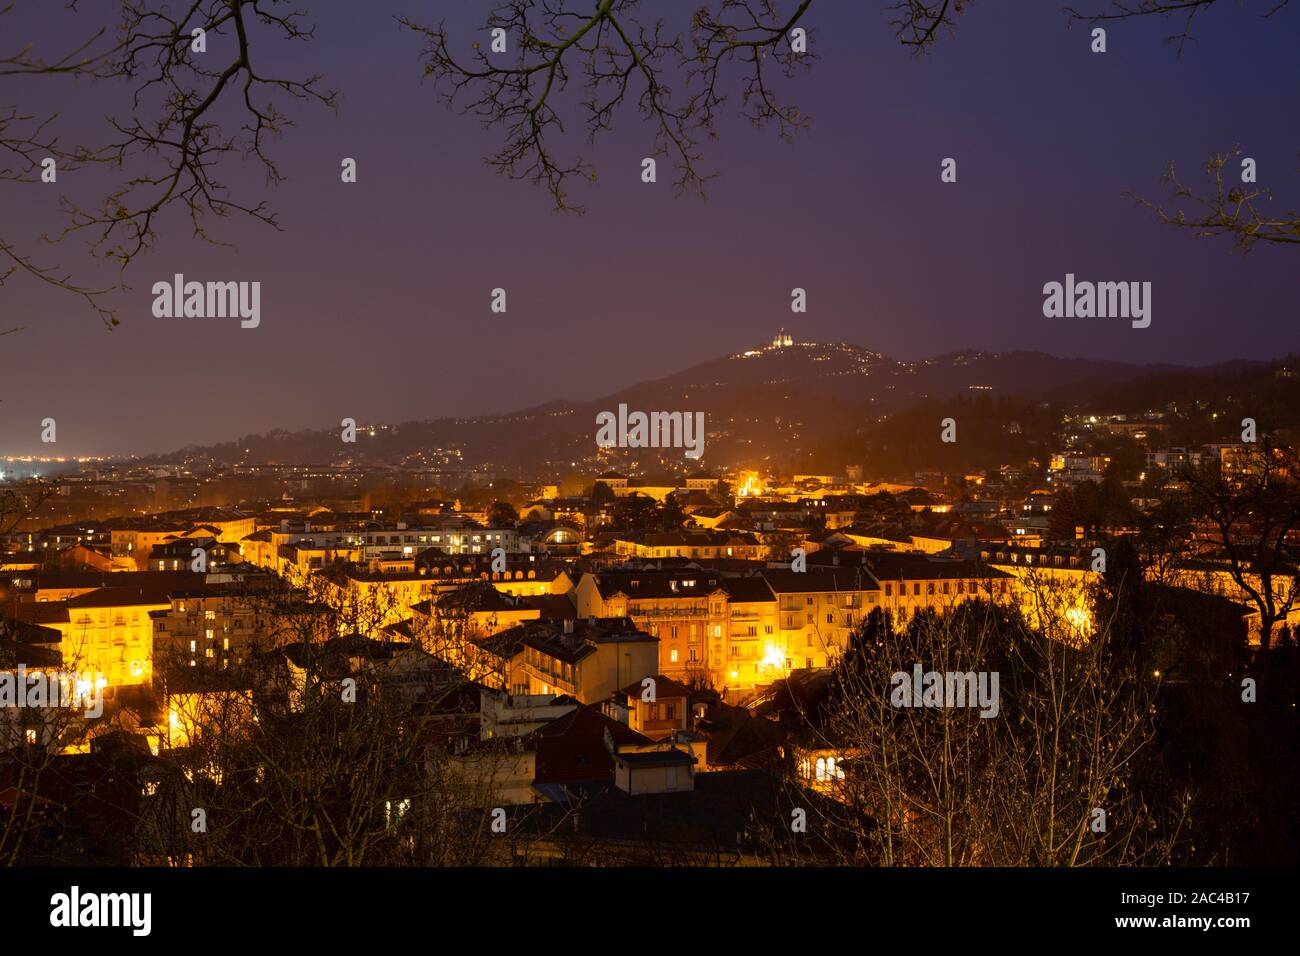 Turin - The skyline of the city with the Basilica di Suprega on the hill at dusk. Stock Photo